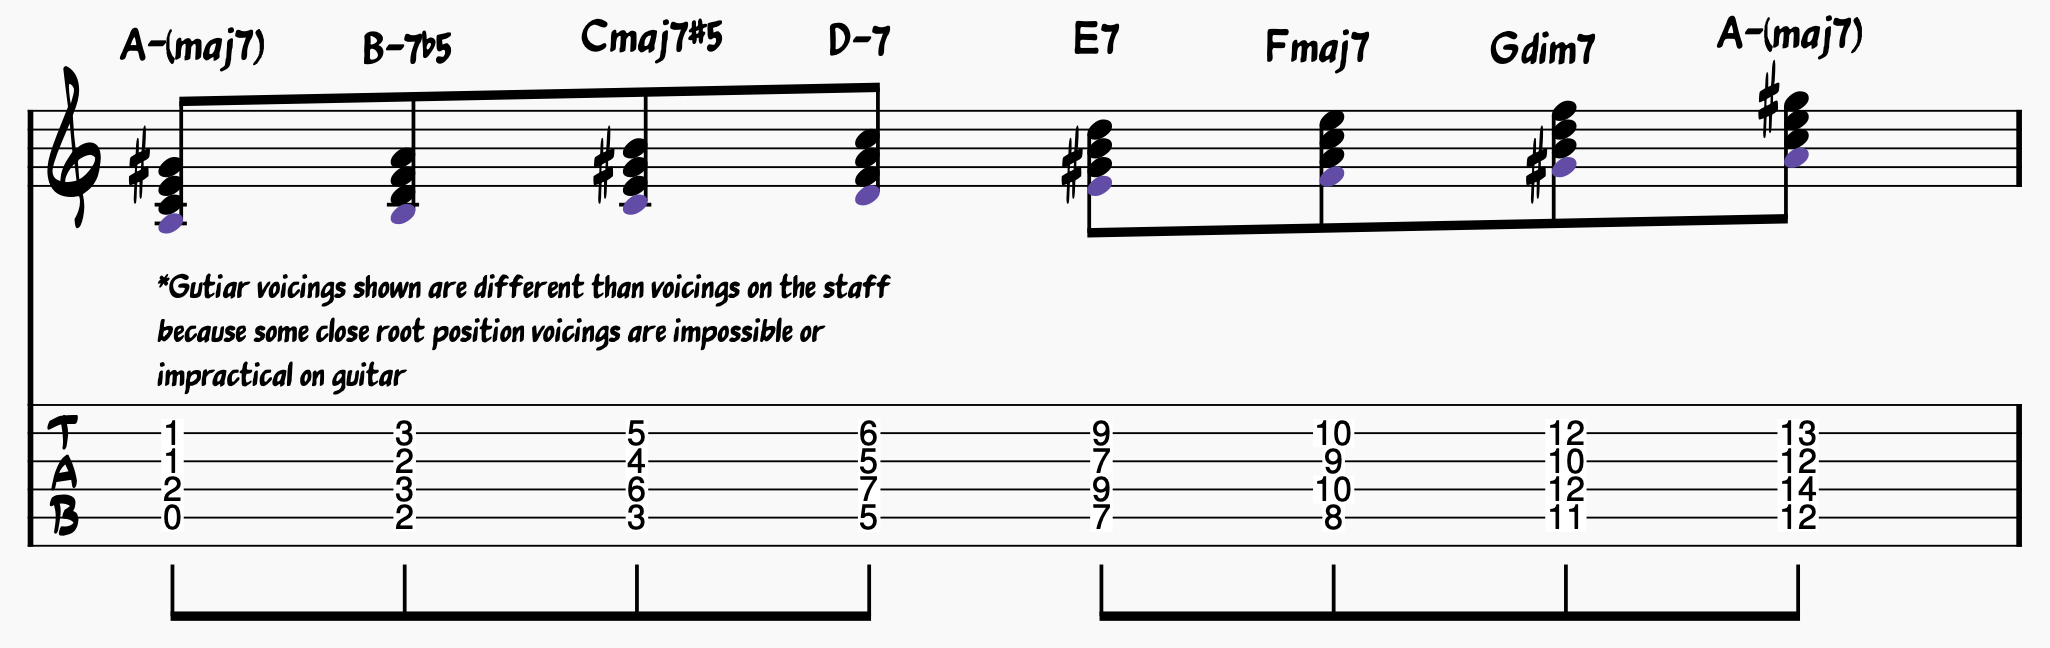 A harmonic minor scale with associated minor major chord